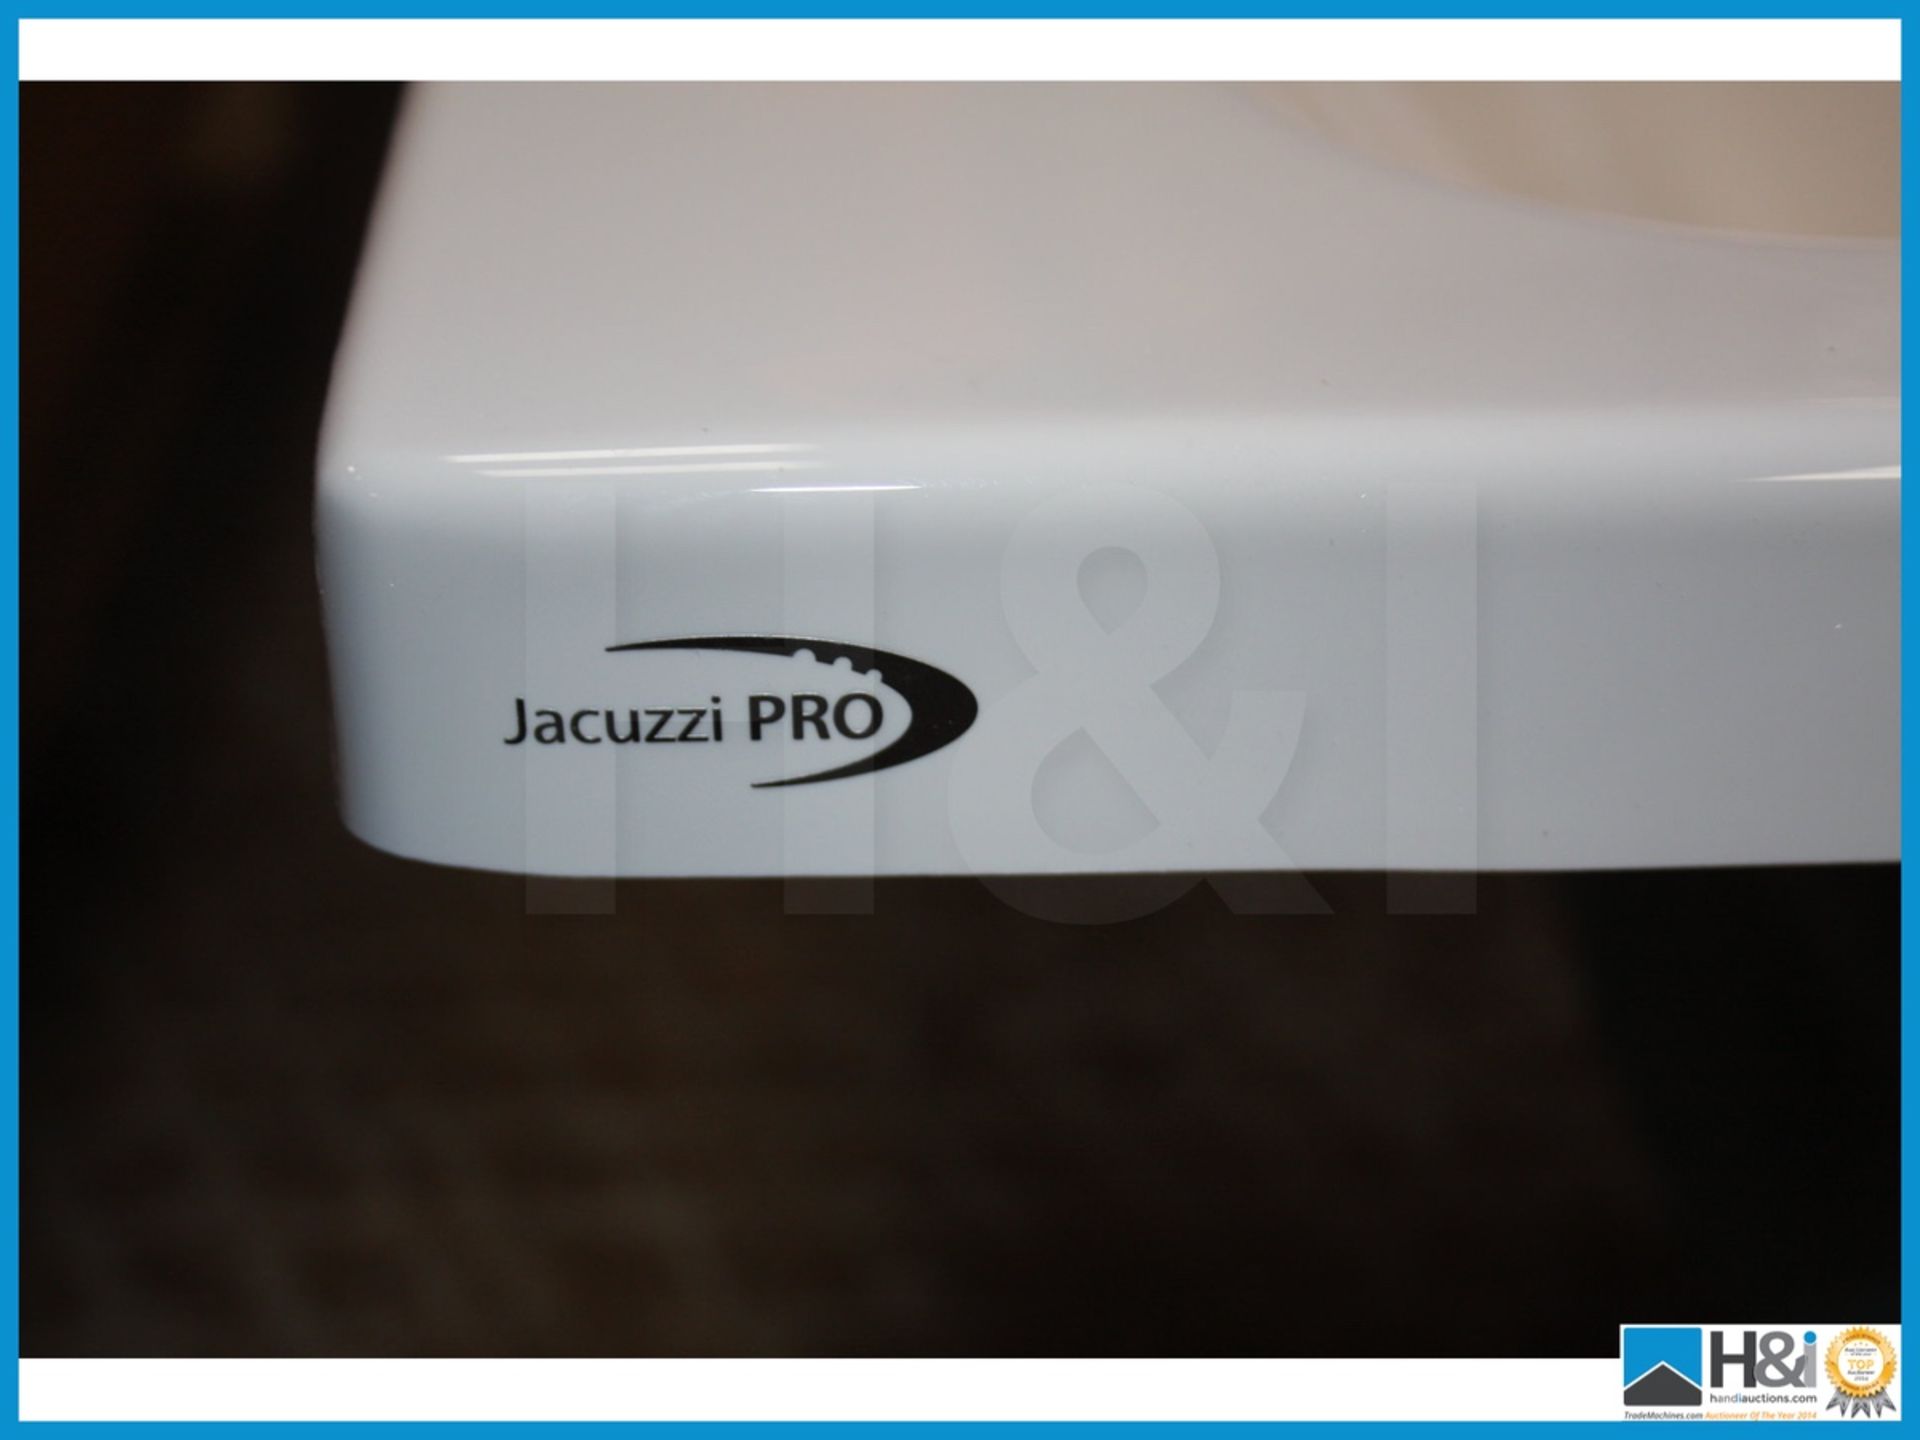 Jacuzzi elatus 1685 x 685 2 tap hole chrome grips new boxed rrp œ899 Appraisal: Viewing Essential - Image 4 of 5